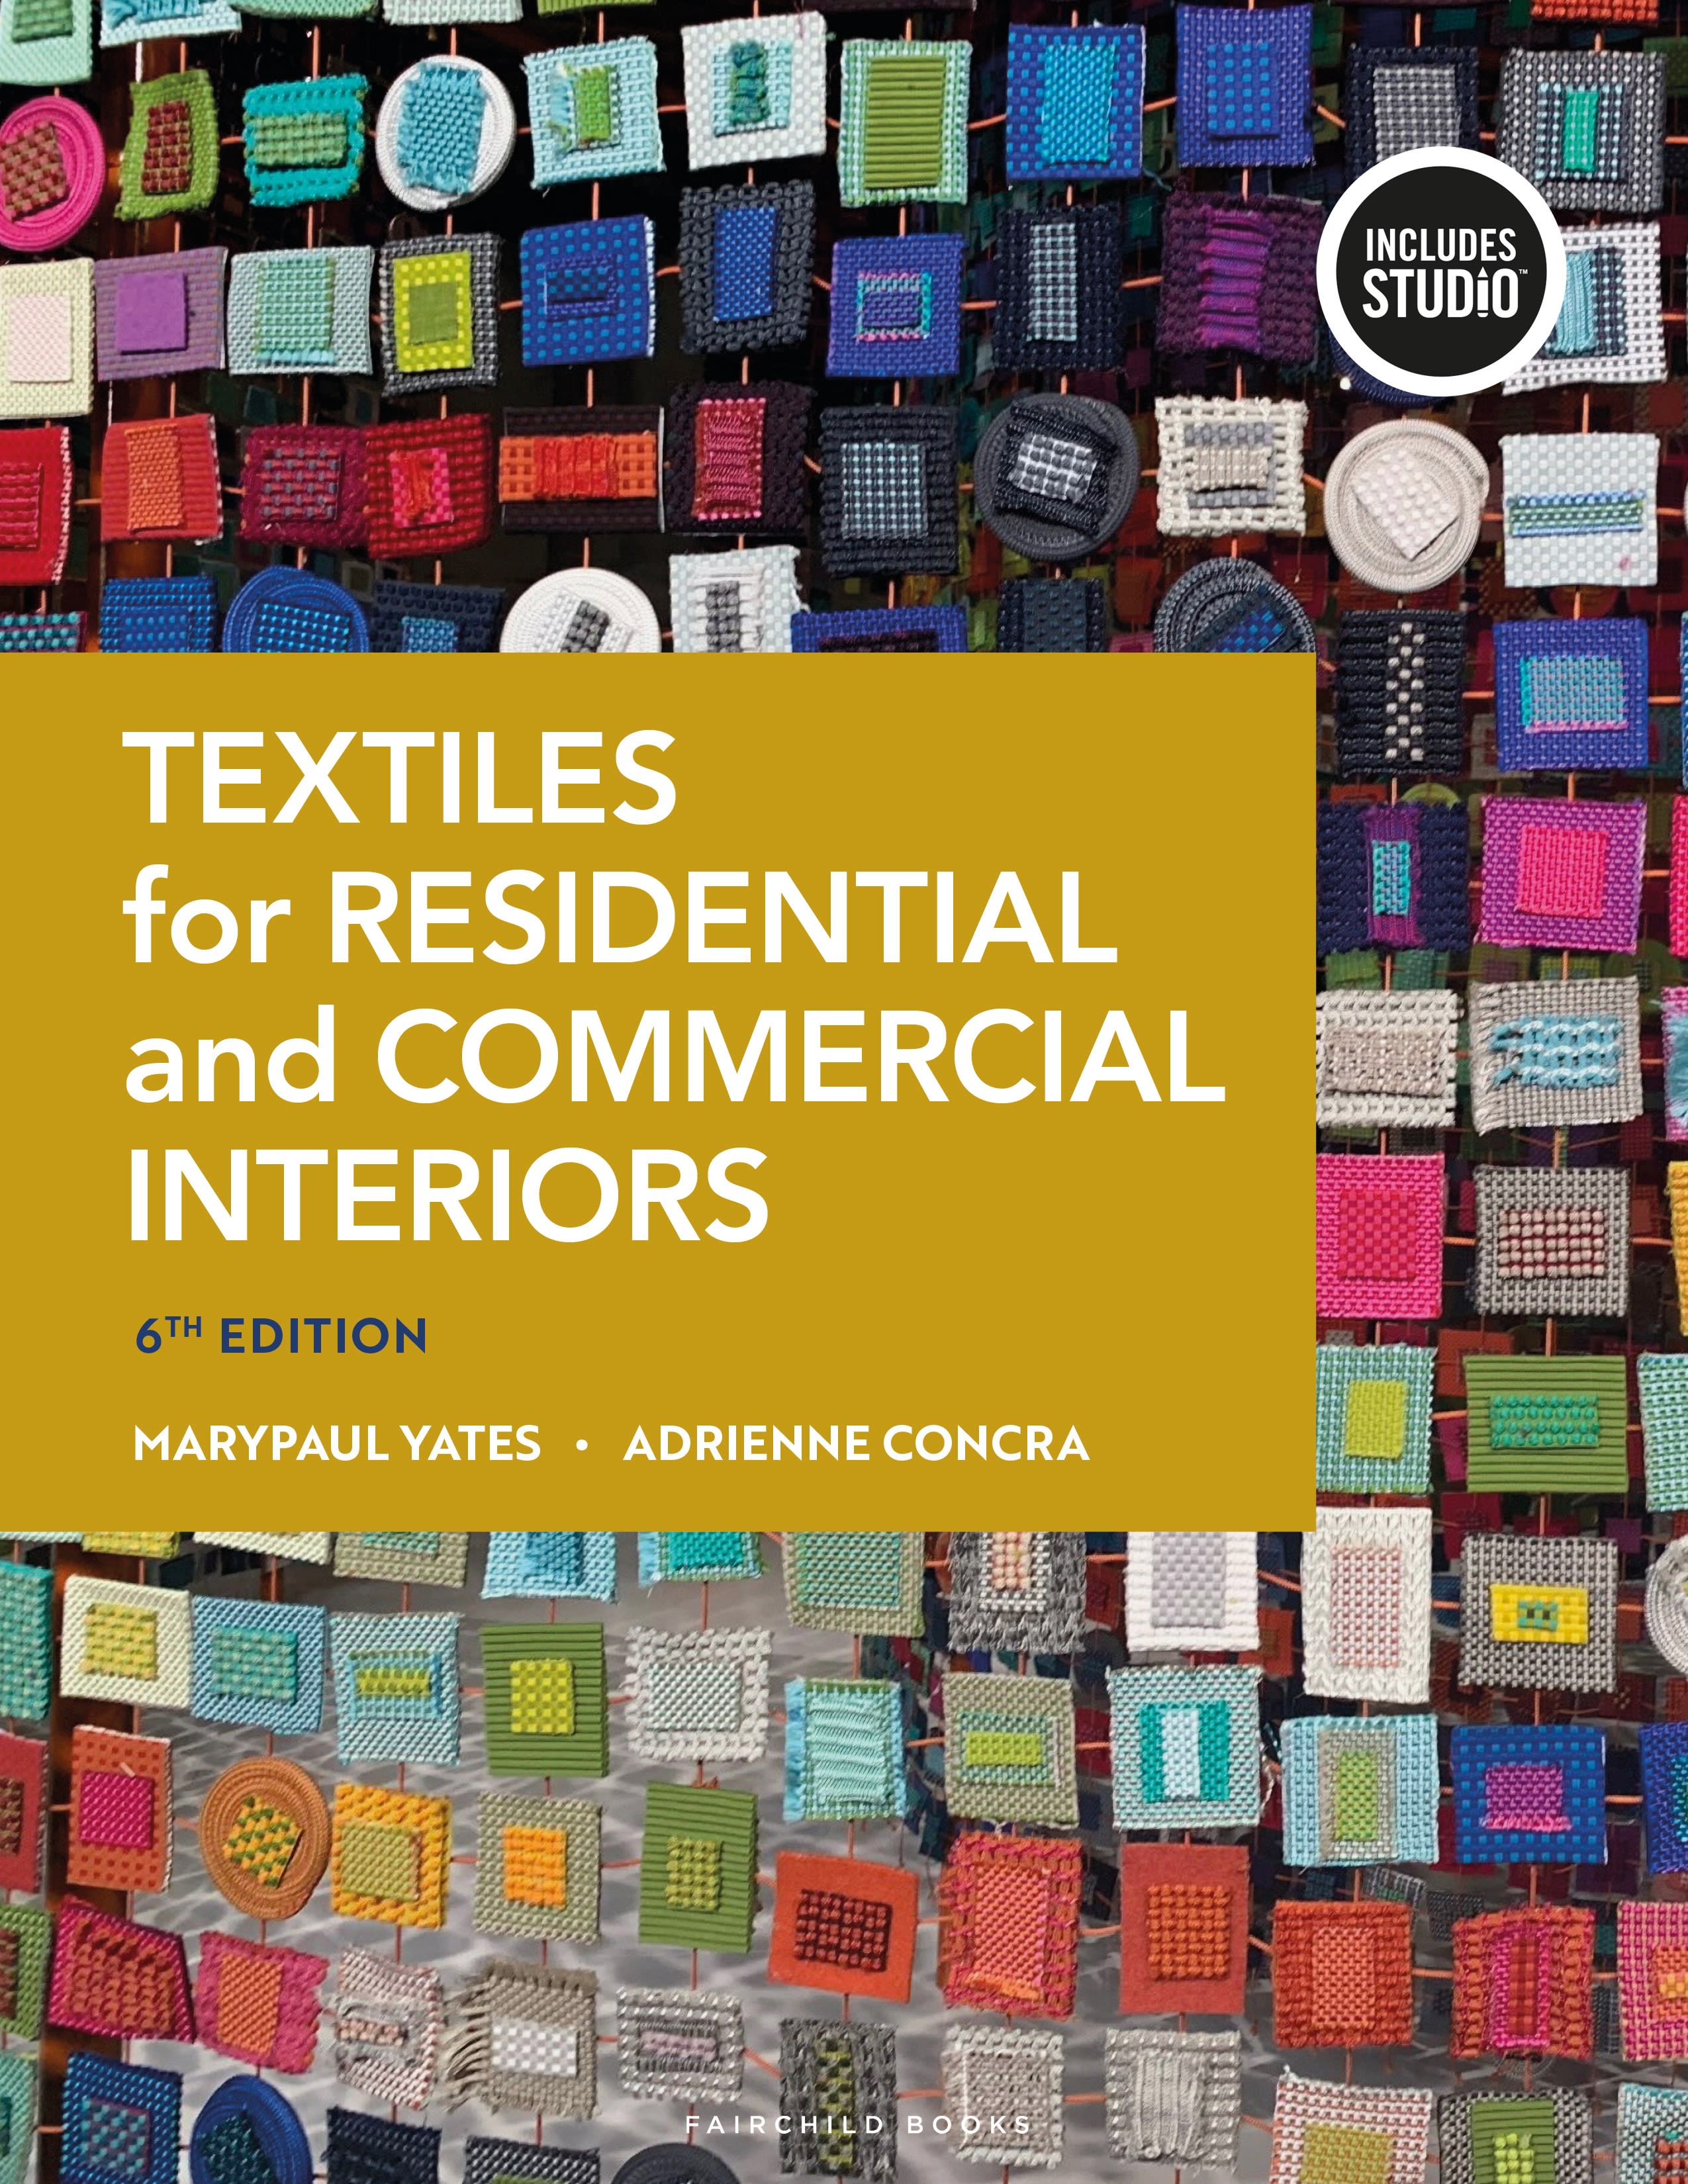 Textiles for Residential and Commercial Interiors book cover